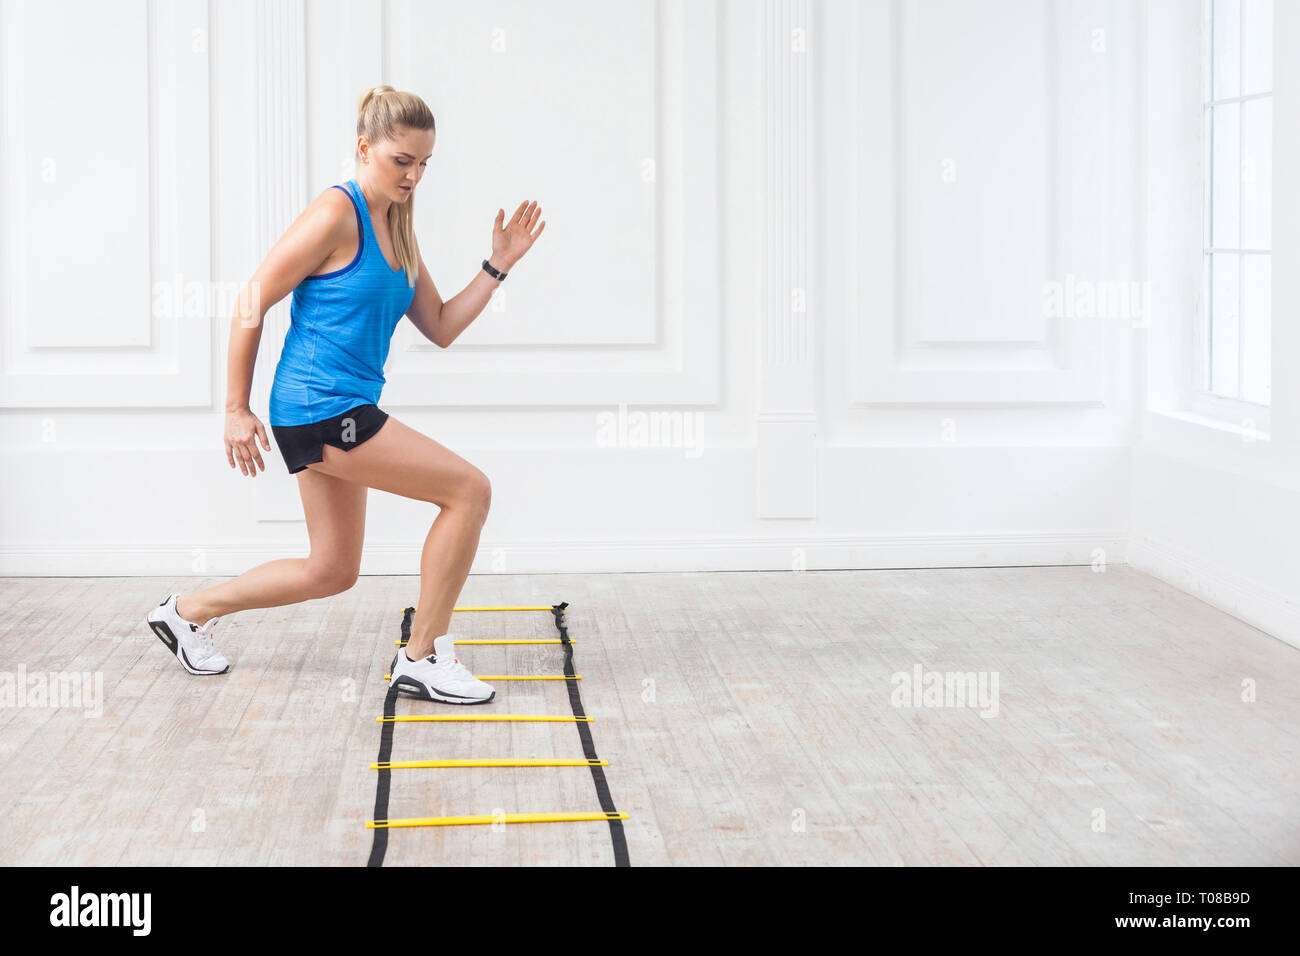 Full length of sporty beautiful young athletic blonde woman in black shorts and blue top are hard working and training on agility ladder drills in gym Stock Photo